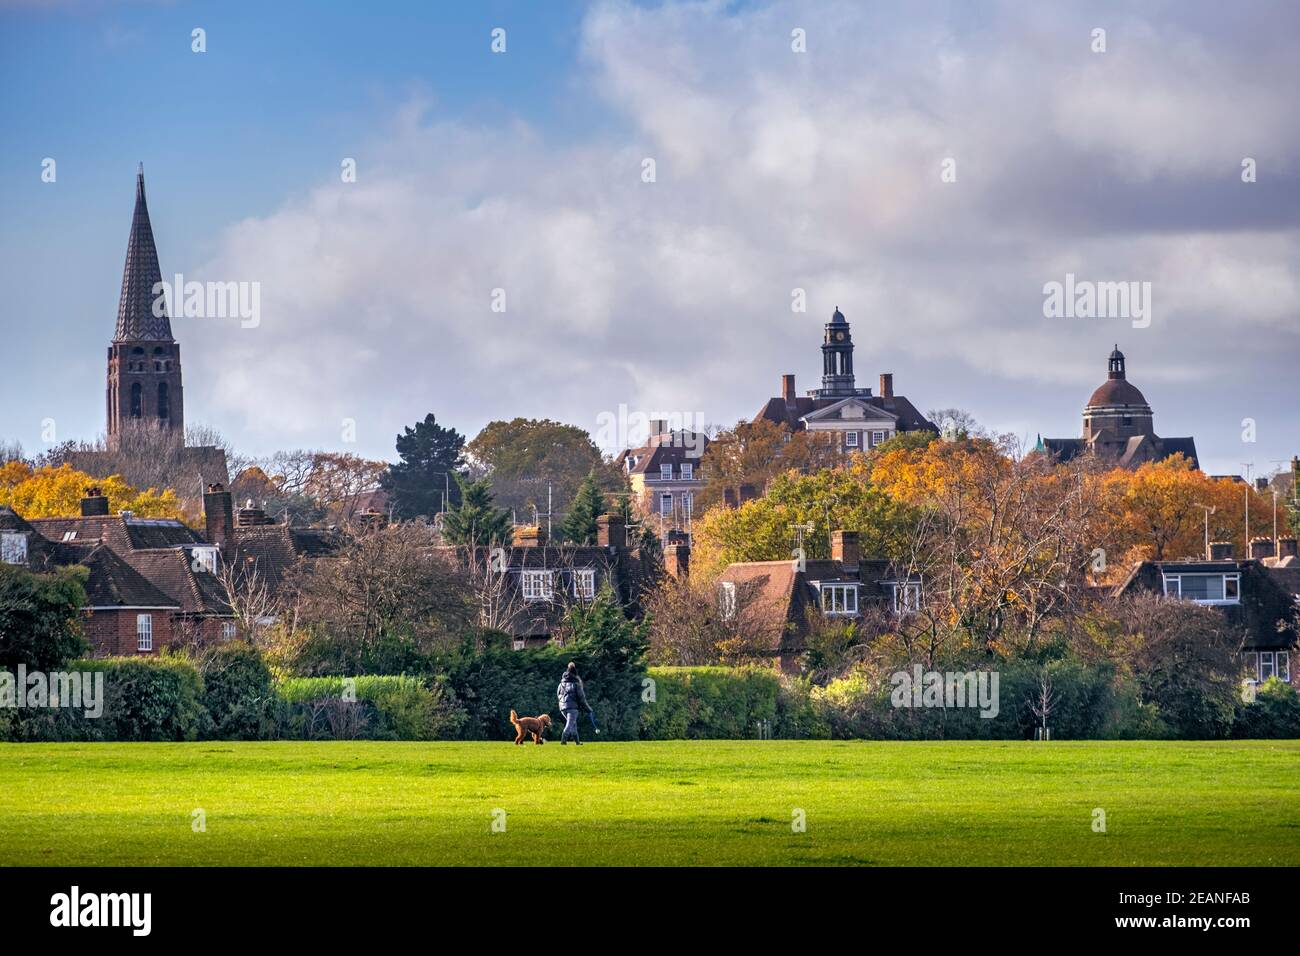 Hampstead Garden Suburb, skyline of the early 20th century suburb in autumn with spire of St. Jude's church Stock Photo